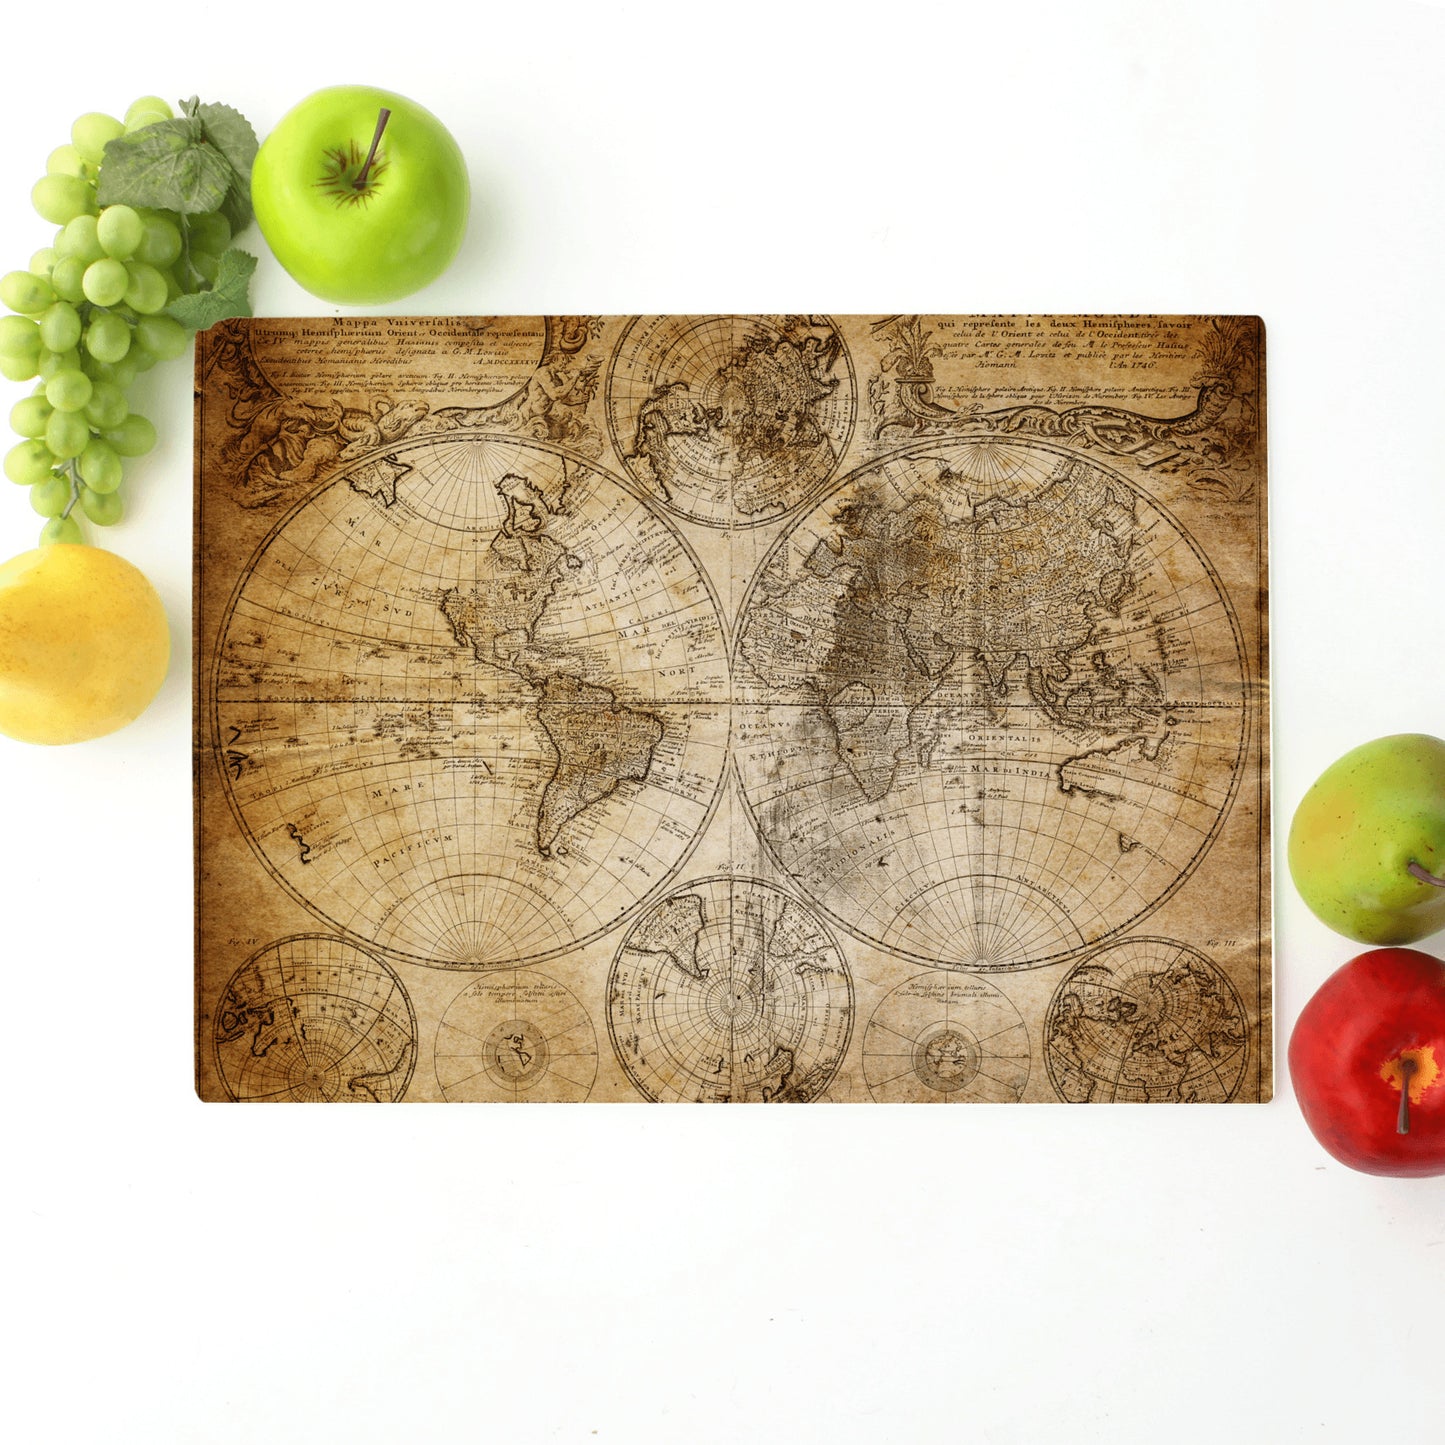 Vintage world map printed on glass cutting board unique gift idea